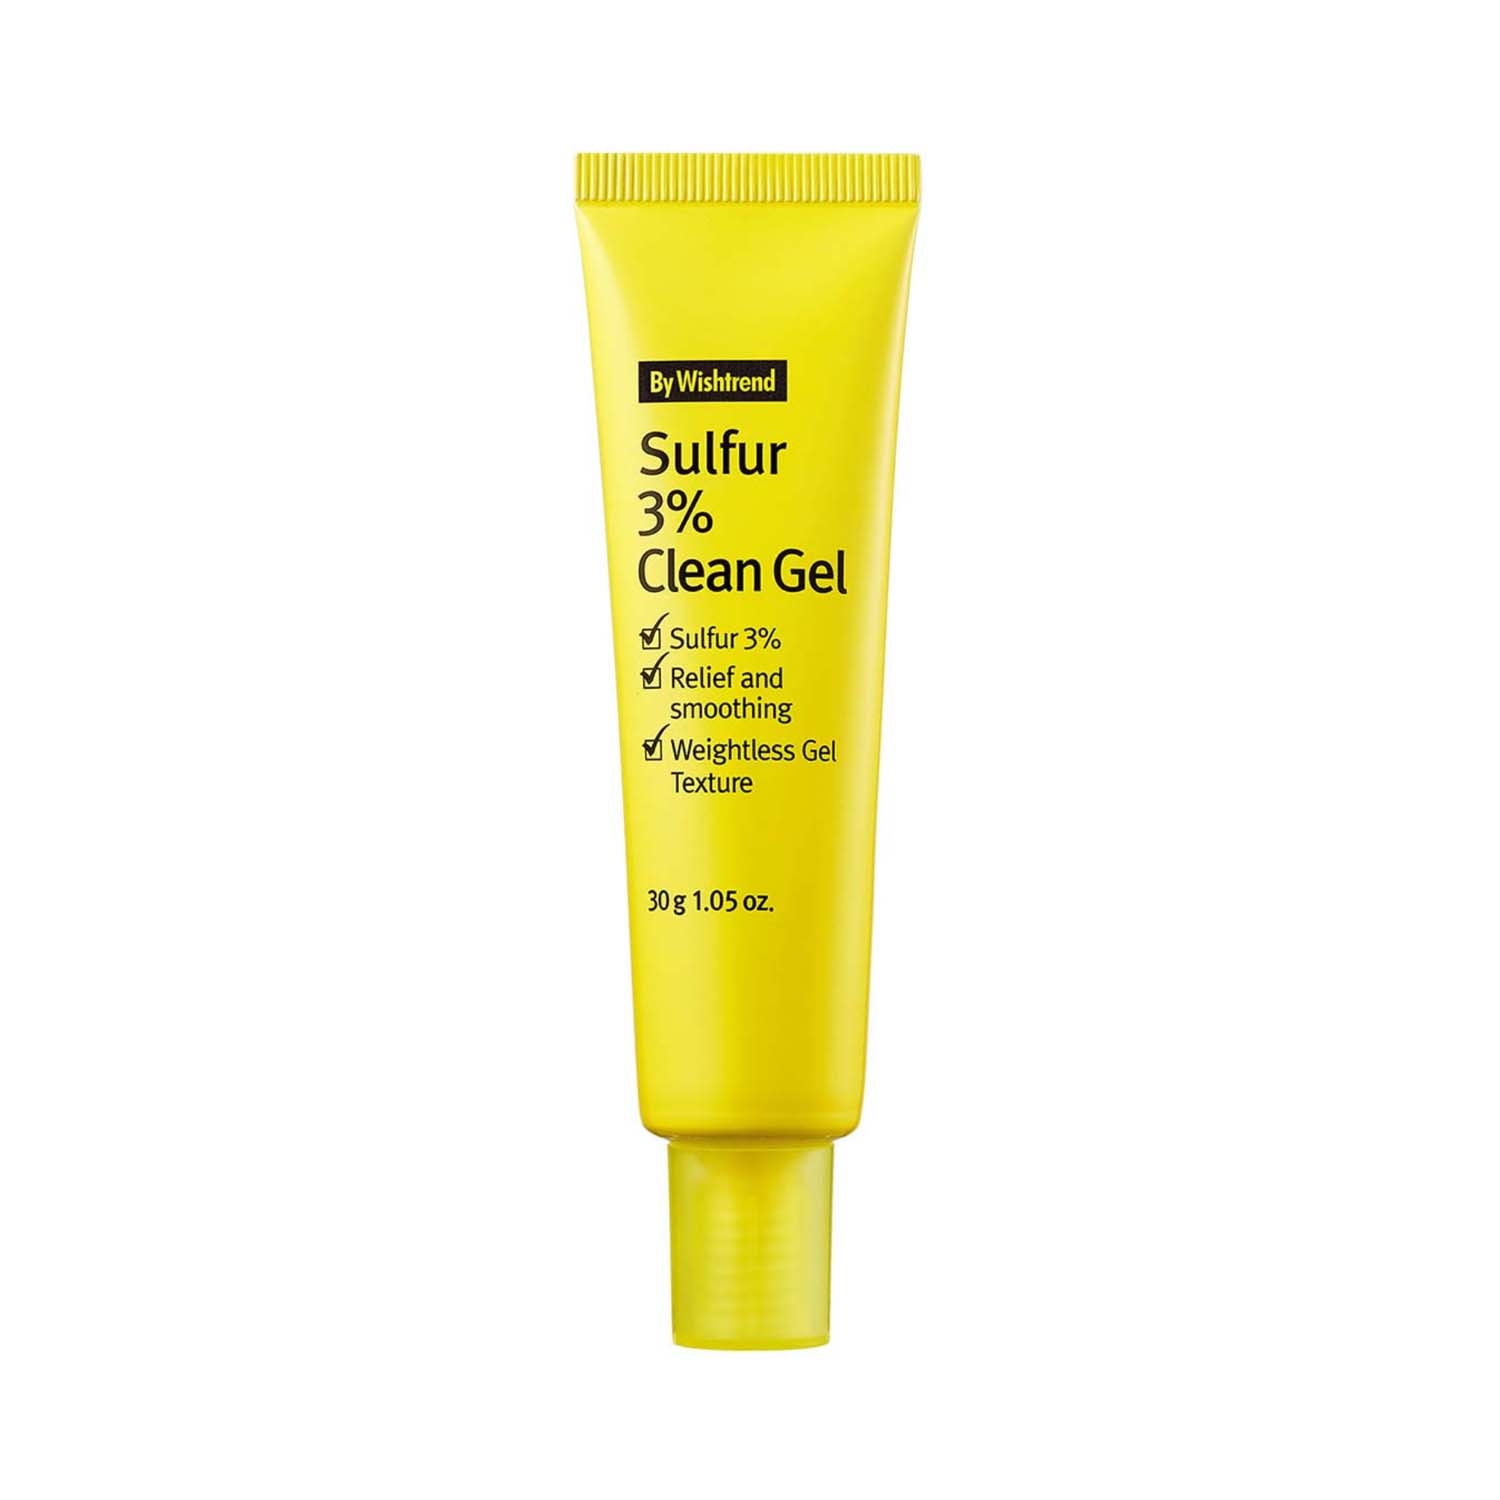 By Wishtrend | By Wishtrend Sulfur 3% Clean Gel (30g)